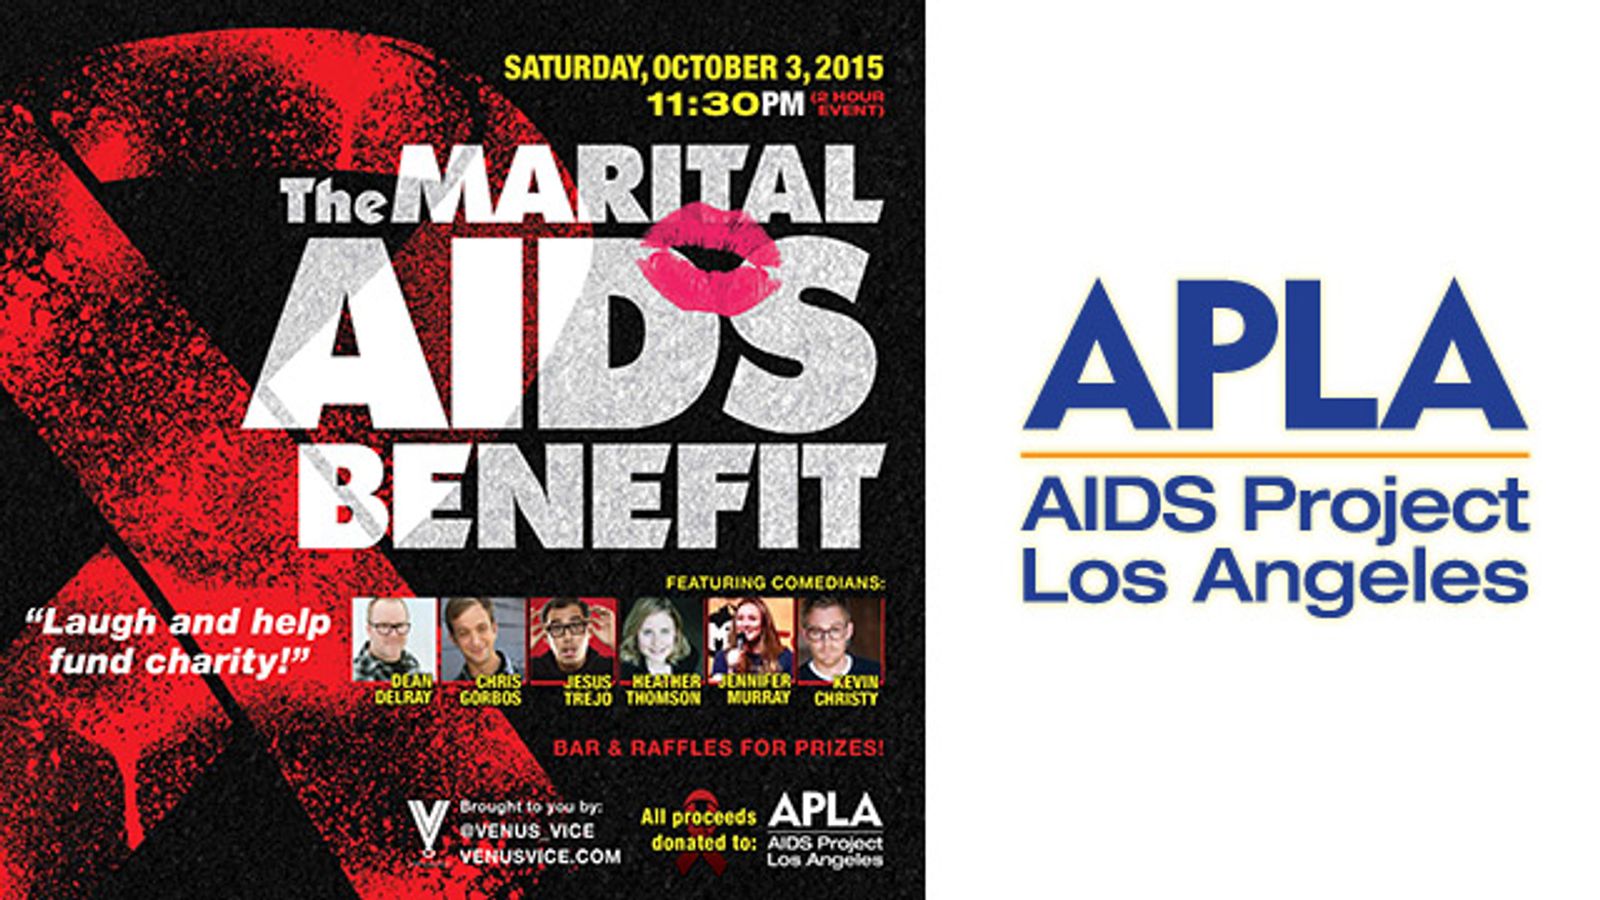 Comedy Fundraiser Mounted to Benefit AIDS Project Los Angeles